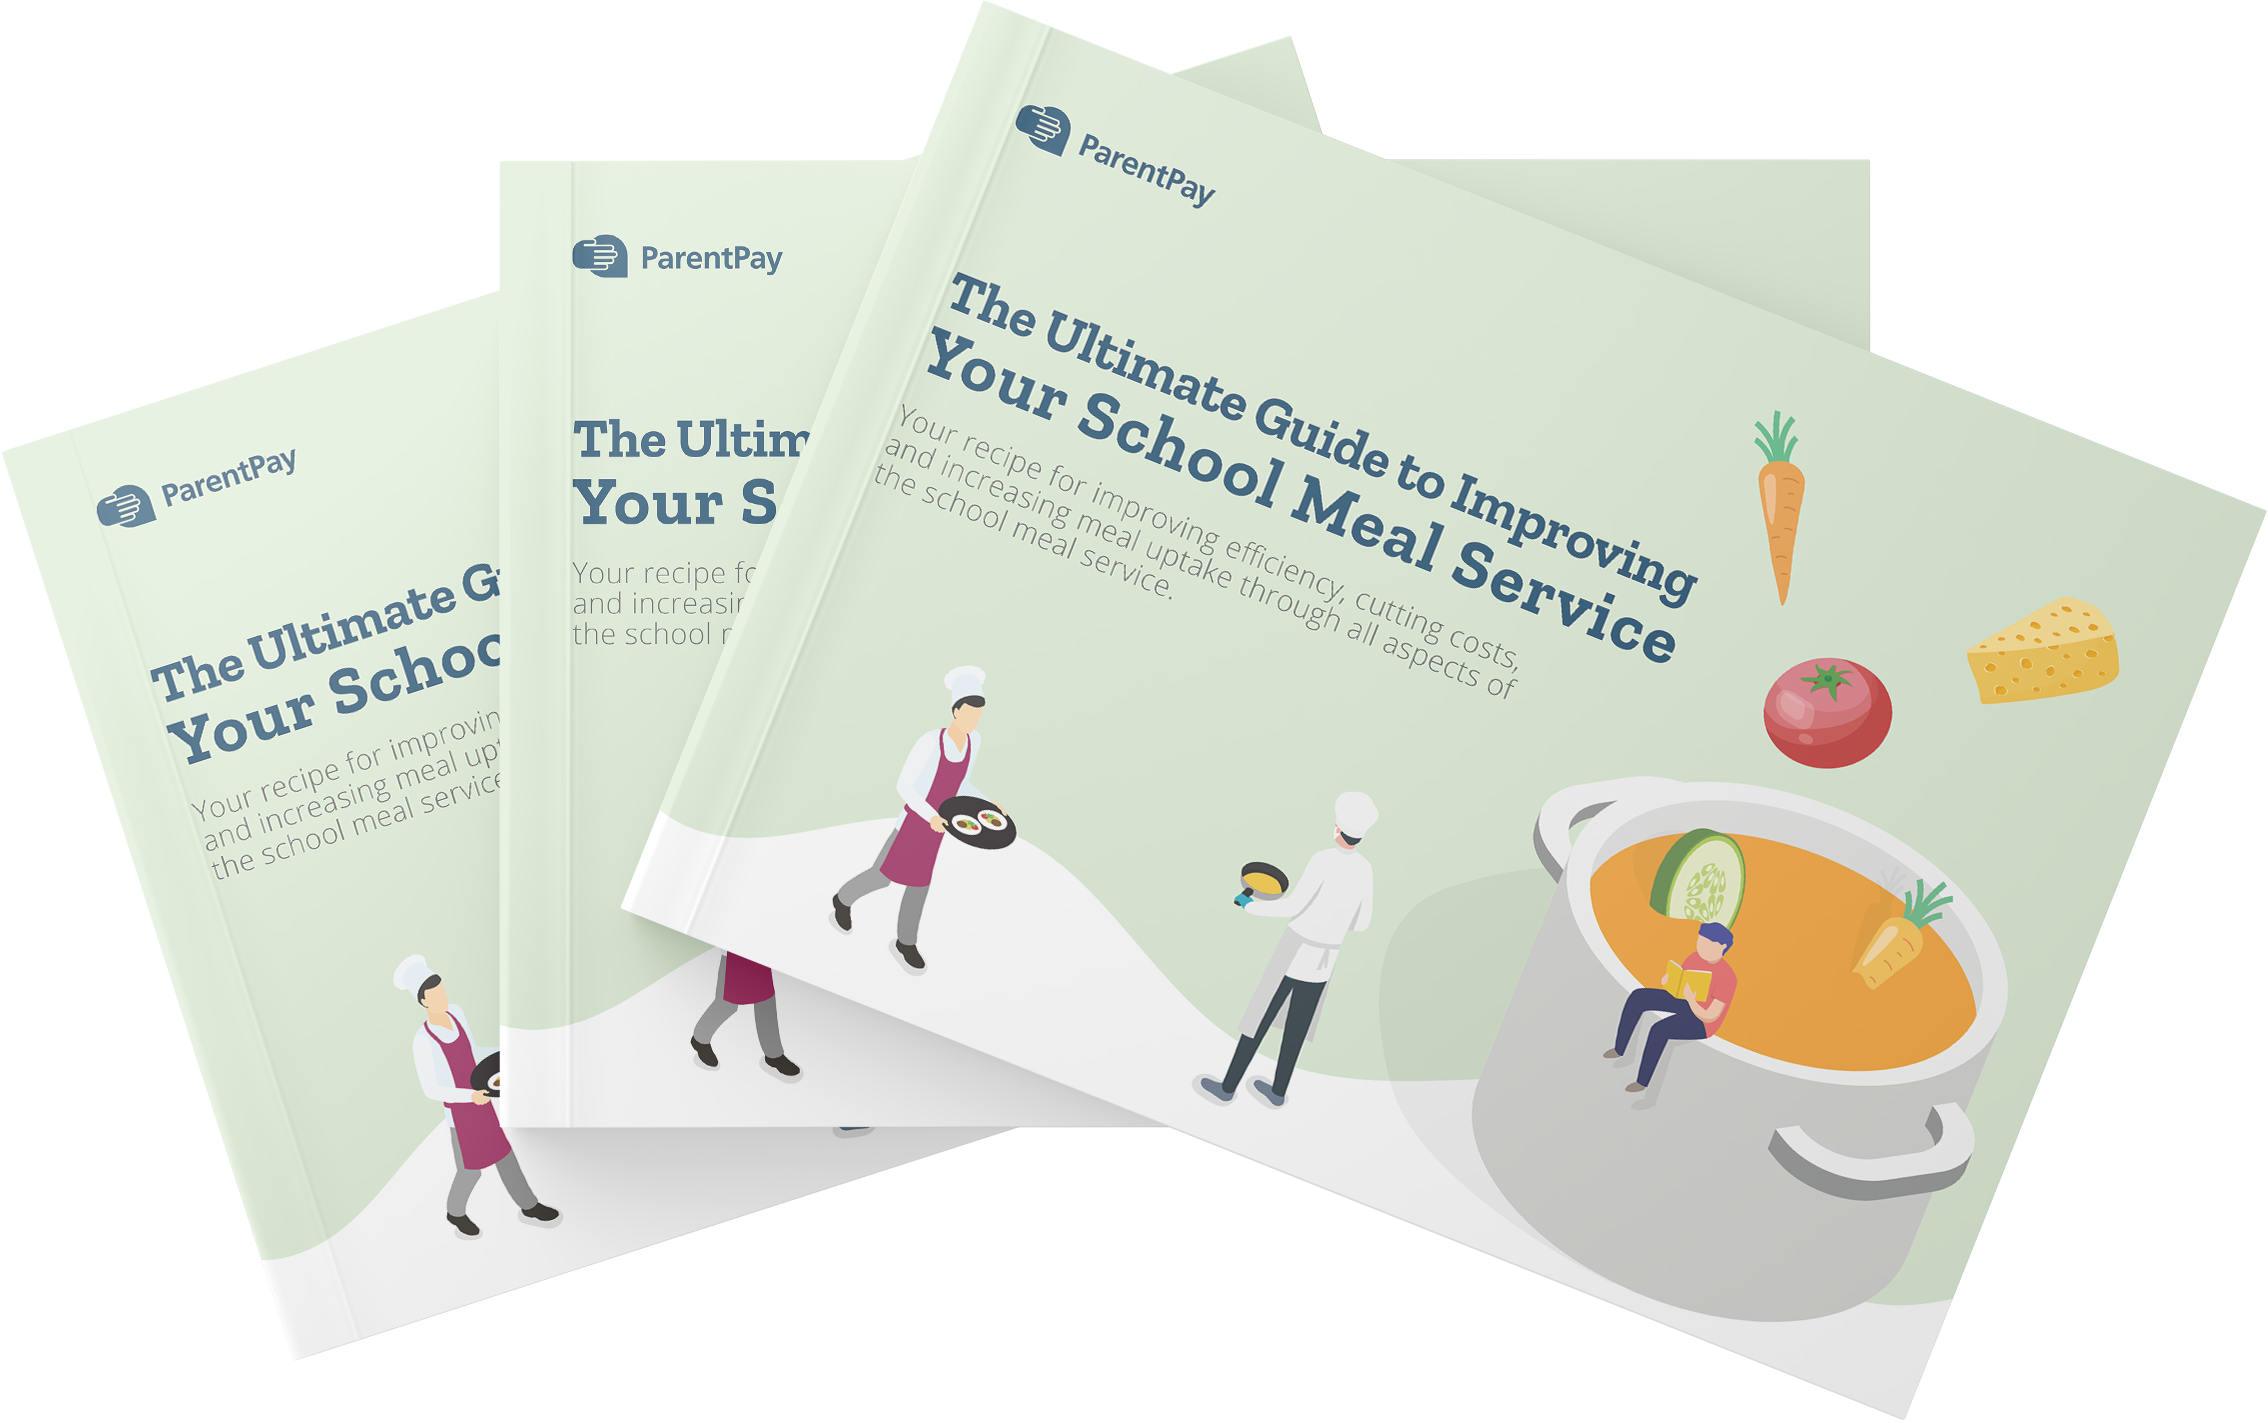 The Ultimate Guide for Improving Your School Meal Service